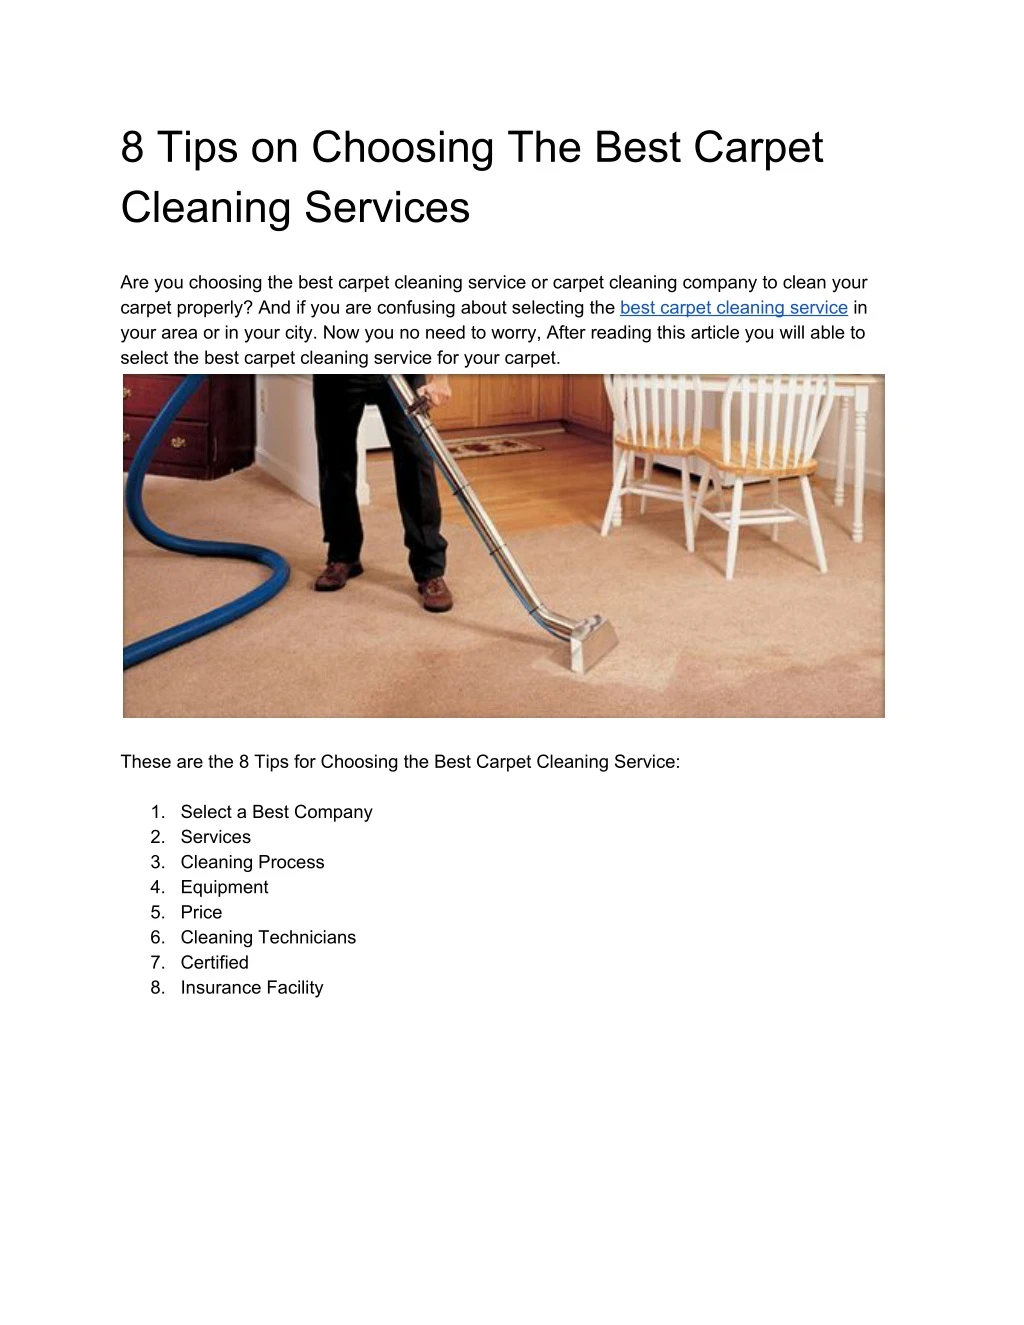 8 tips on choosing the best carpet cleaning